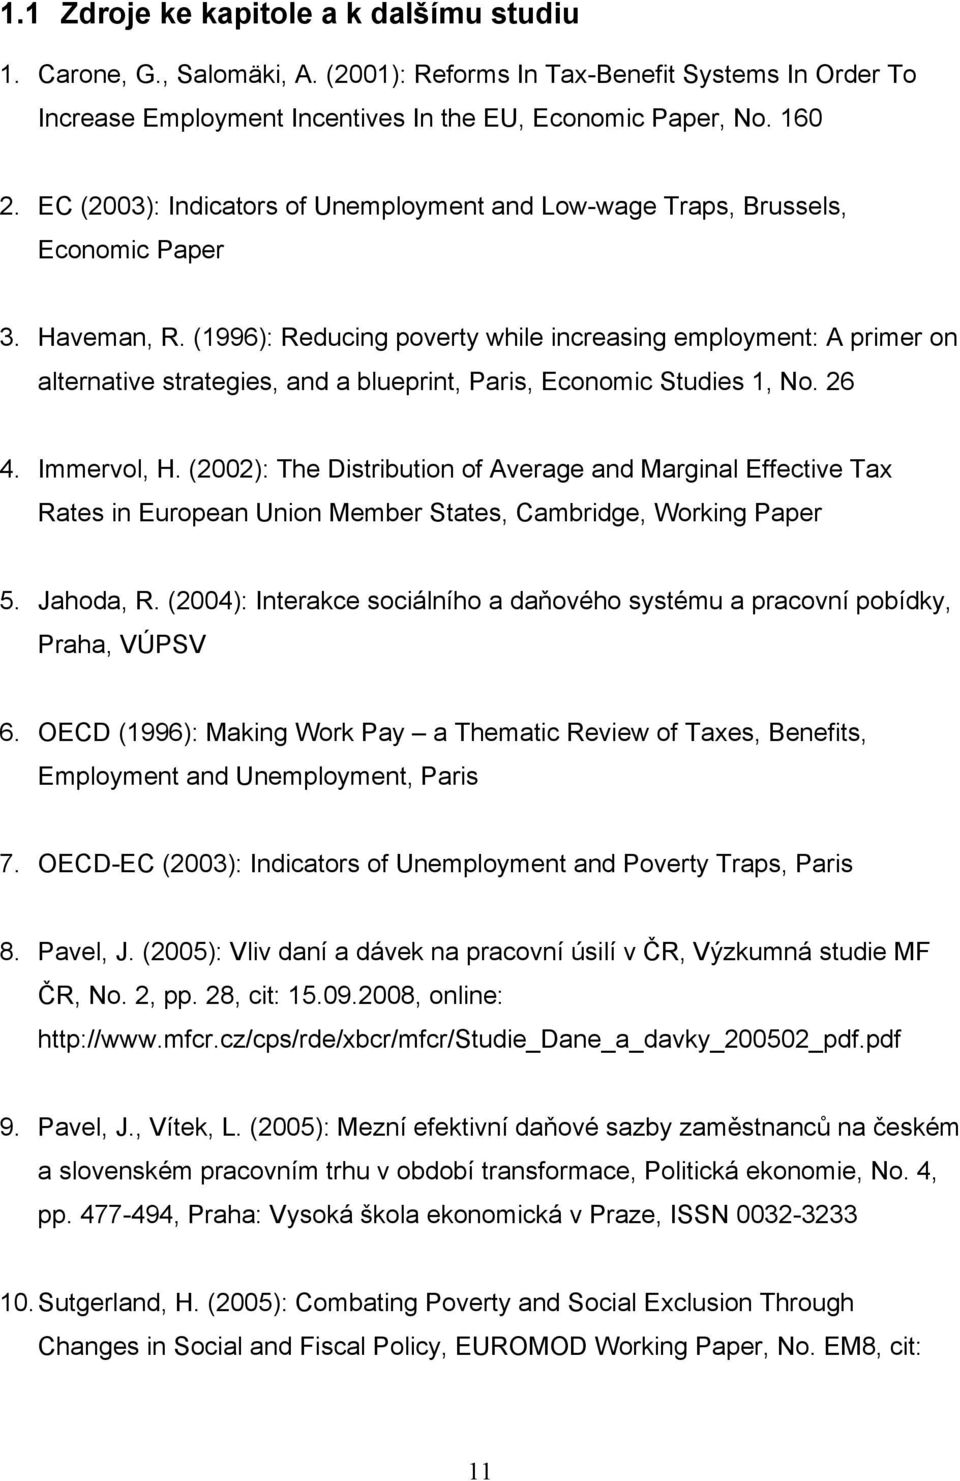 (1996): Reducing poverty while increasing employment: A primer on alternative strategies, and a blueprint, Paris, Economic Studies 1, No. 26 4. Immervol, H.